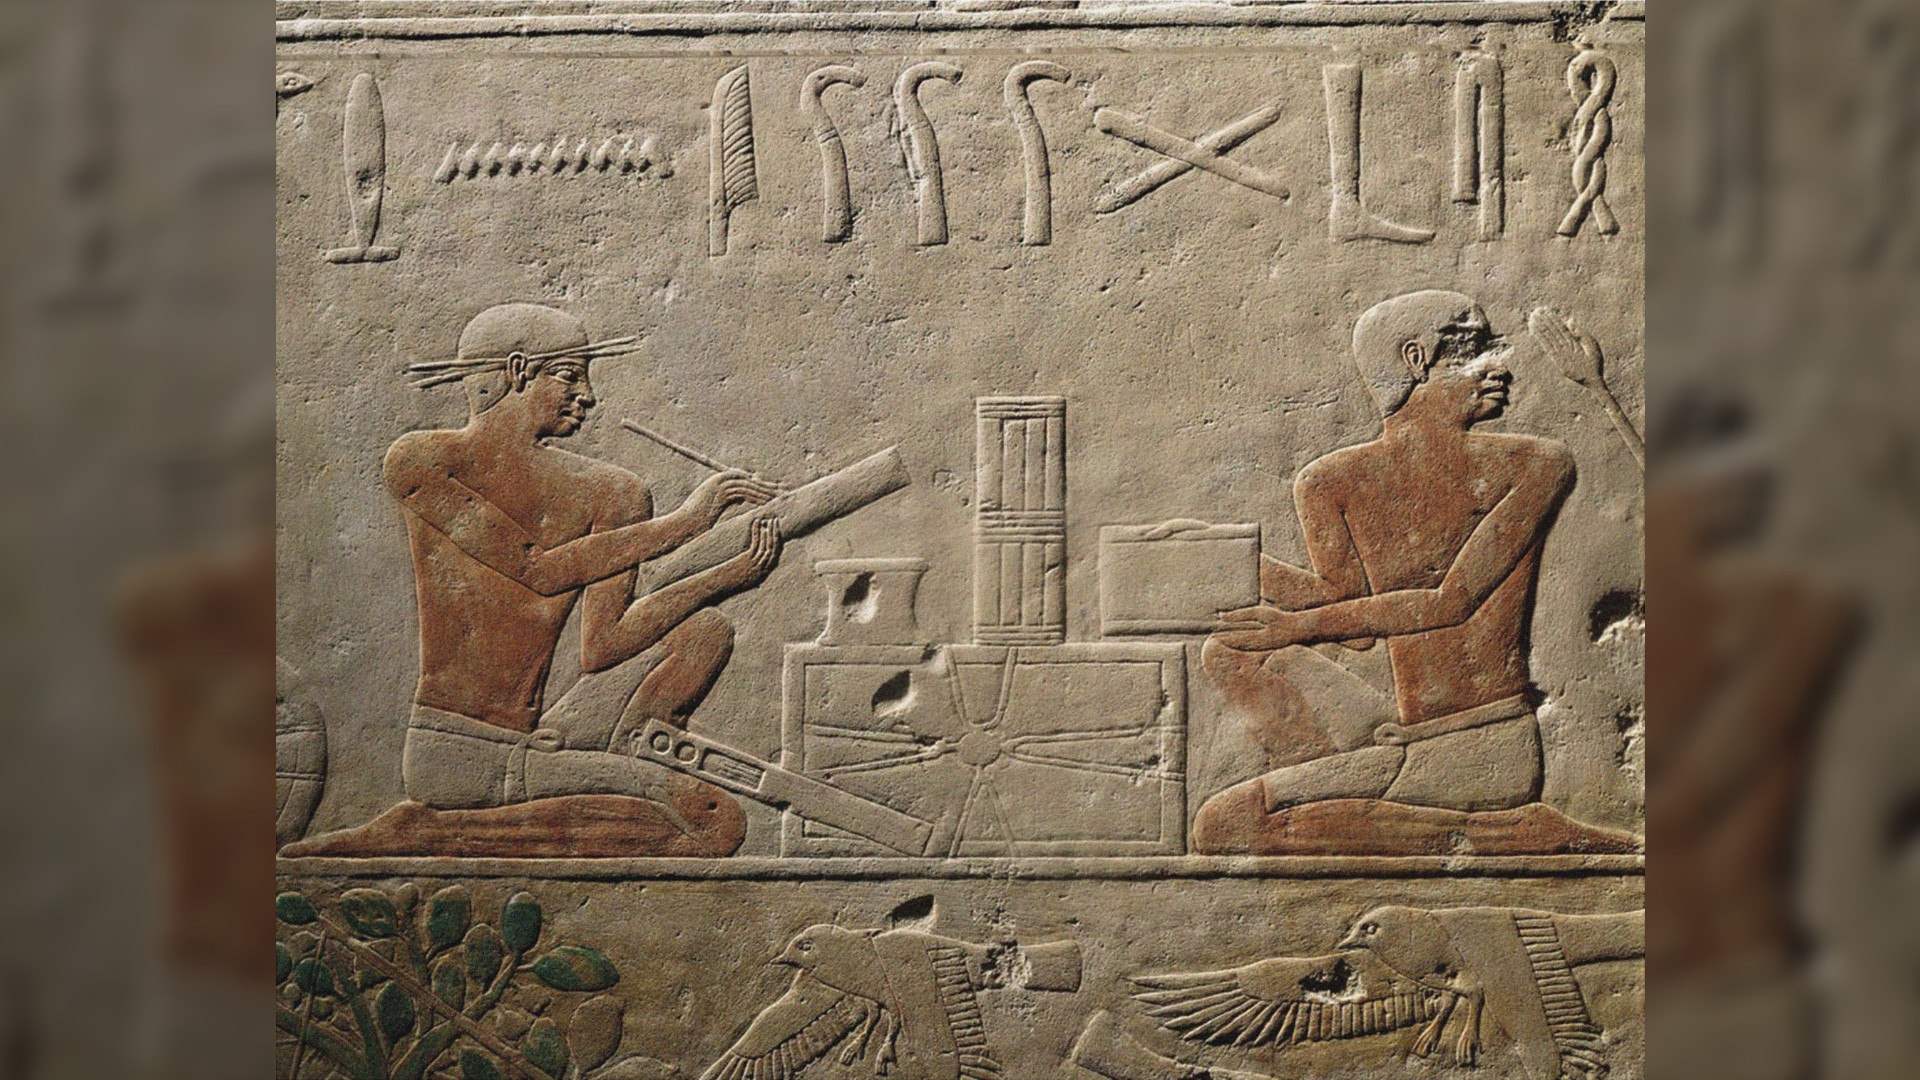 This is a relief from the Mastaba of Akhethotep at Saqqara, Old Kingdom from about the 5th Dynasty, about 2494-2345 BC.  Here we see 2 scribes facing each other.  One writes on a tablet and the other holds a parchment.  Above them are several hieroglyphs, and below are 2 images of flying birds.